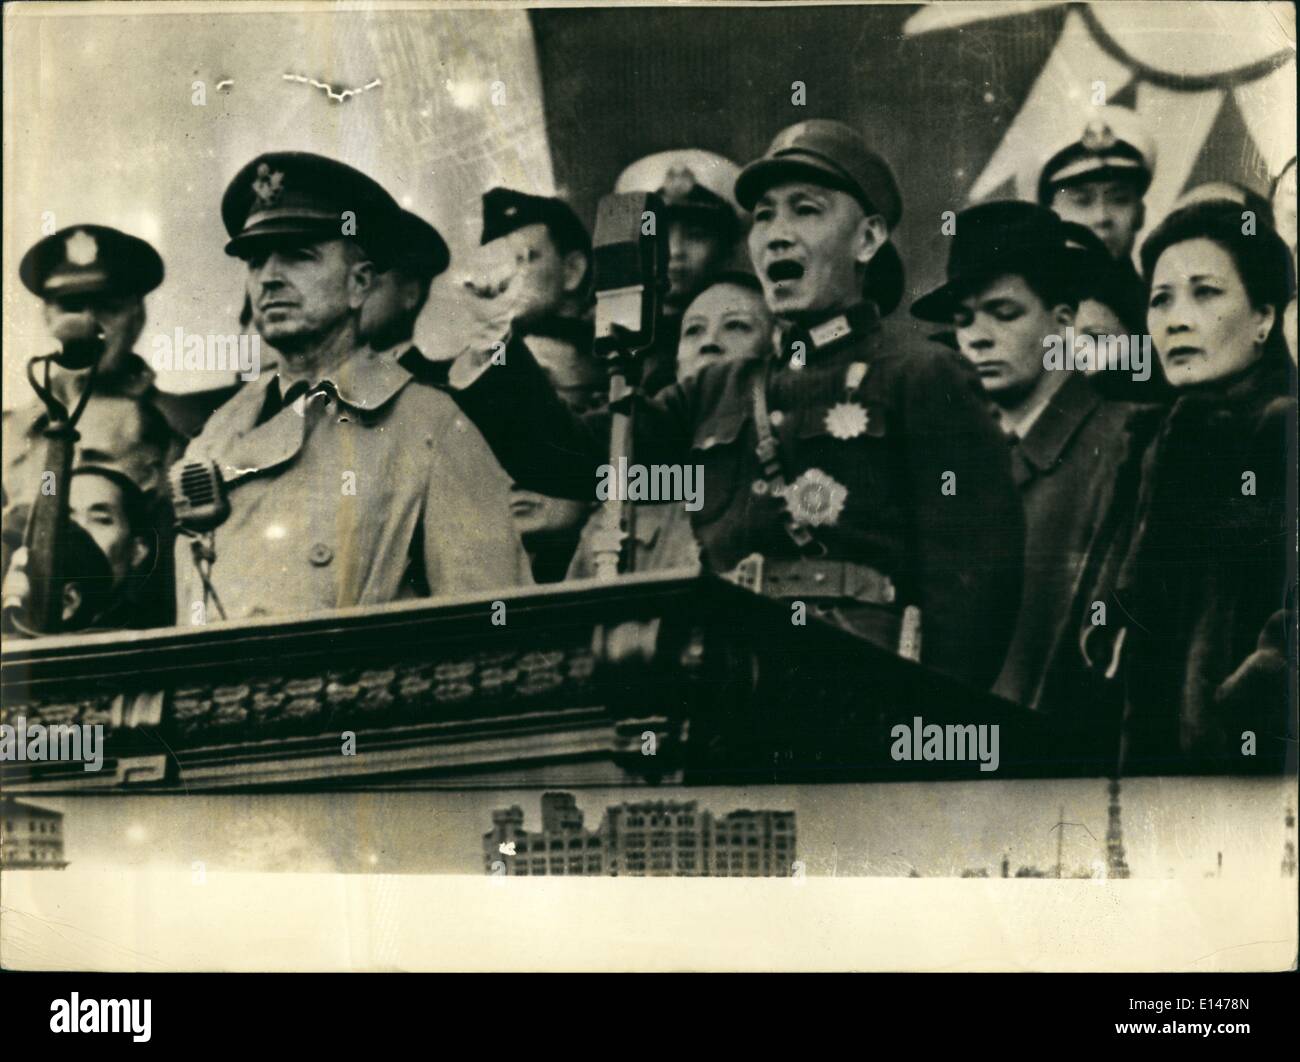 Apr. 16, 2012 - General Chang Kai Shek is speaking to an enthusiastic crowd after his return from Shanghai were he had been since the Japanese occupation in 1937. Louison Bobet & Jo Velly With Poulidor At Start of Paris-Nice Race Stock Photo